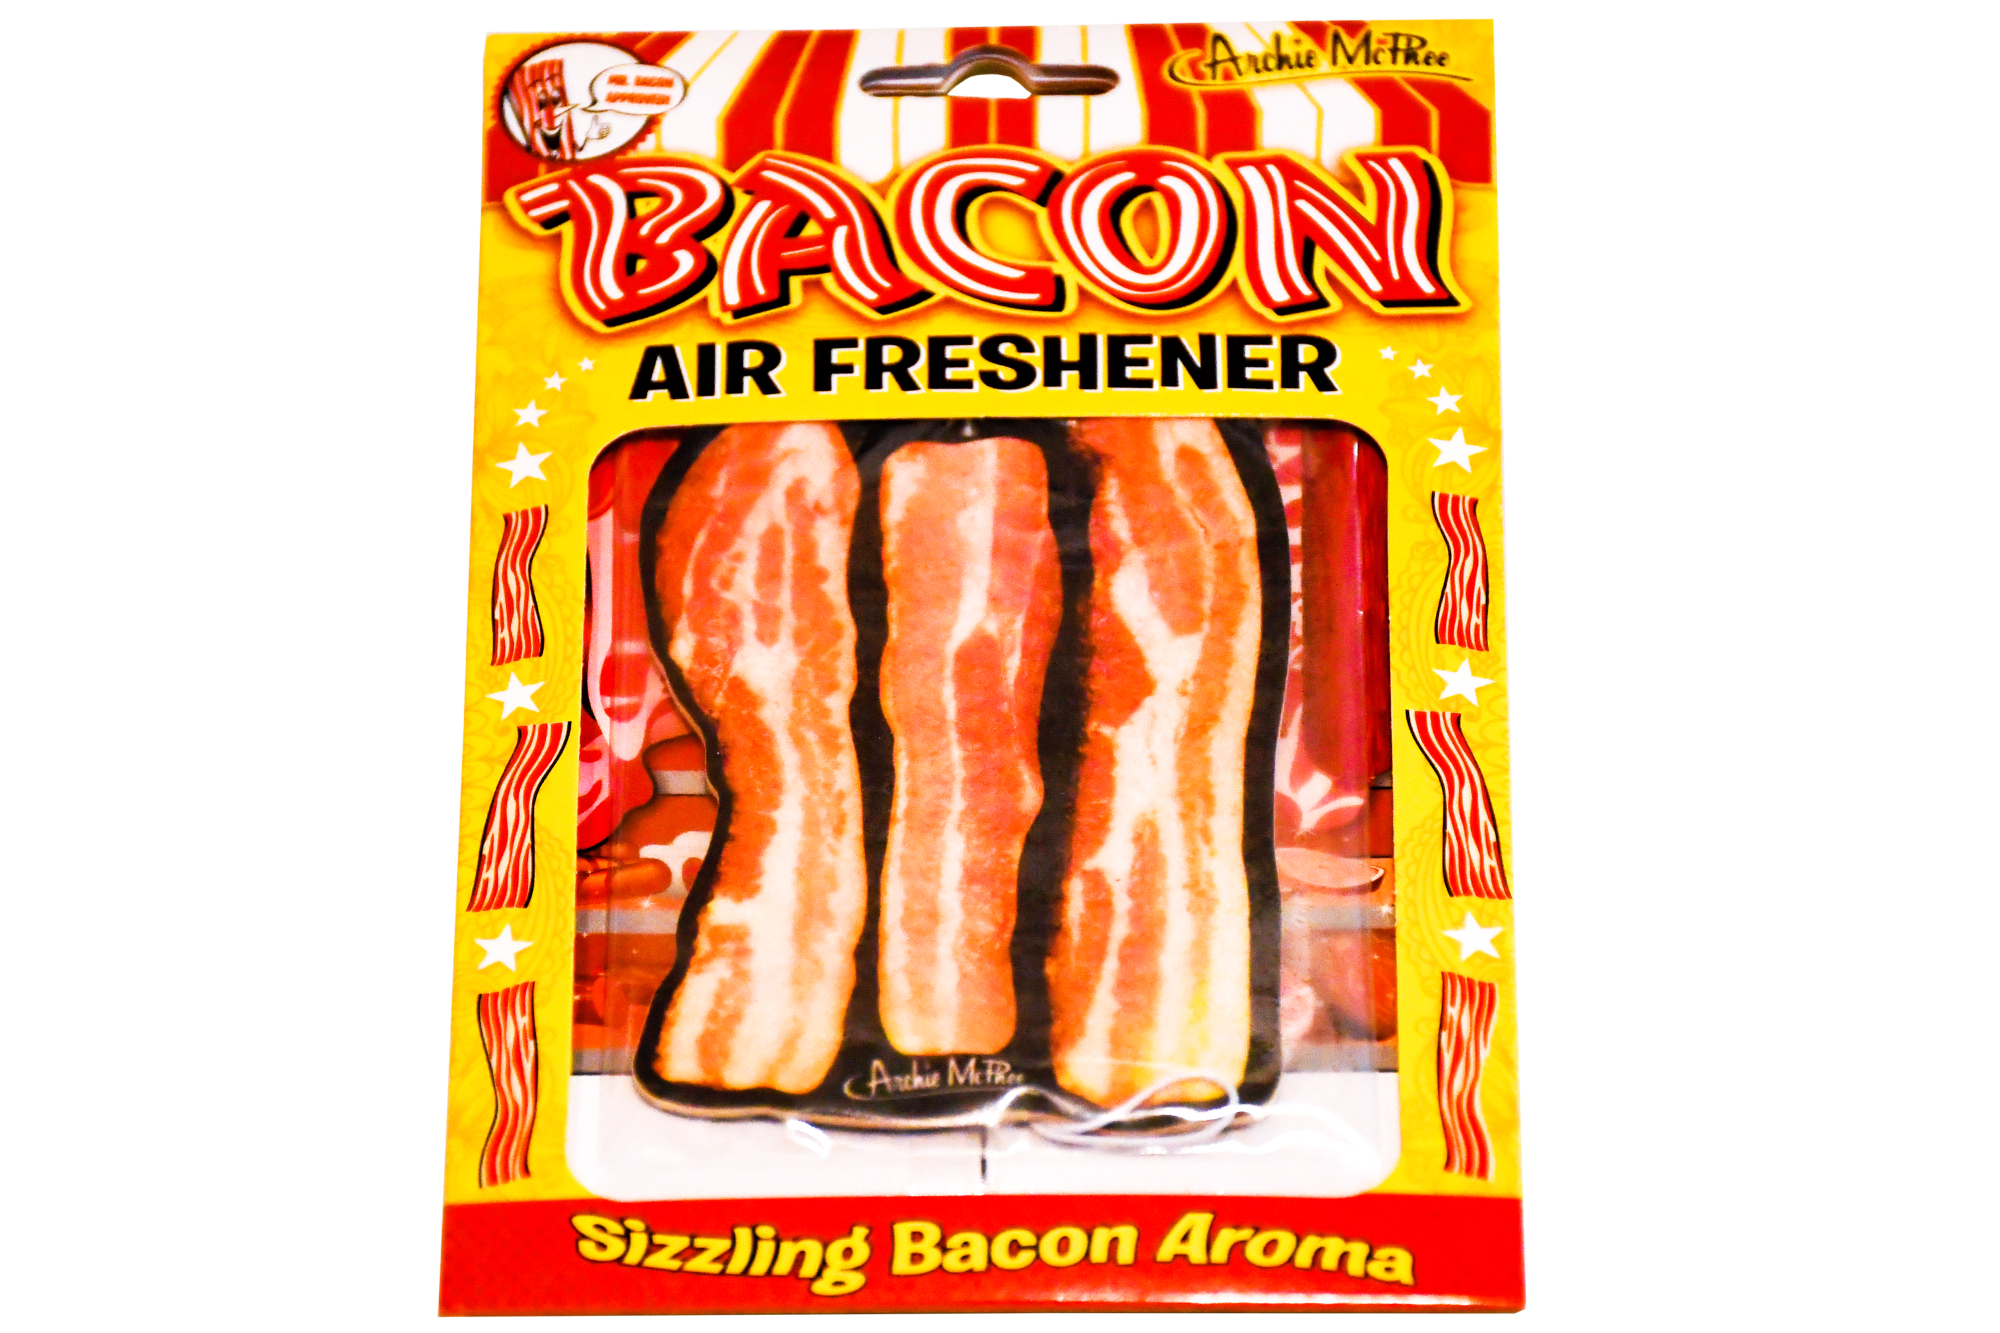 A bacon air freshener in its packaging